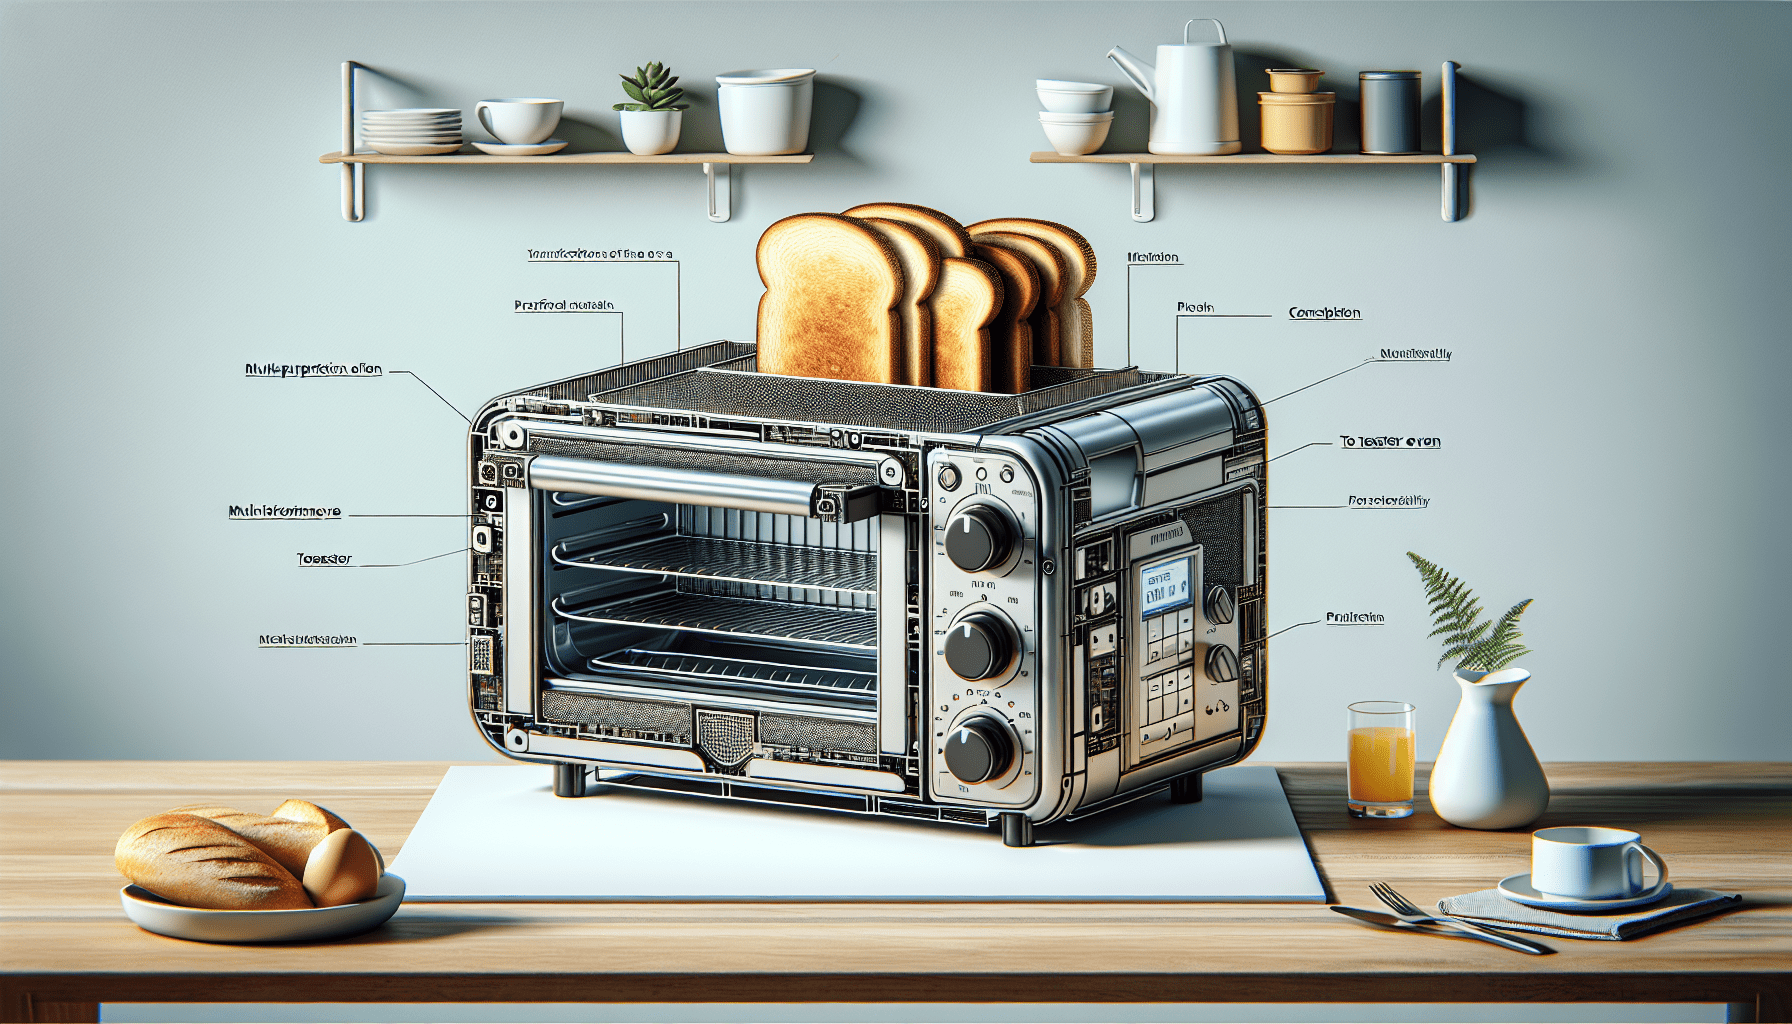 What Appliance Can Replace A Toaster Oven?